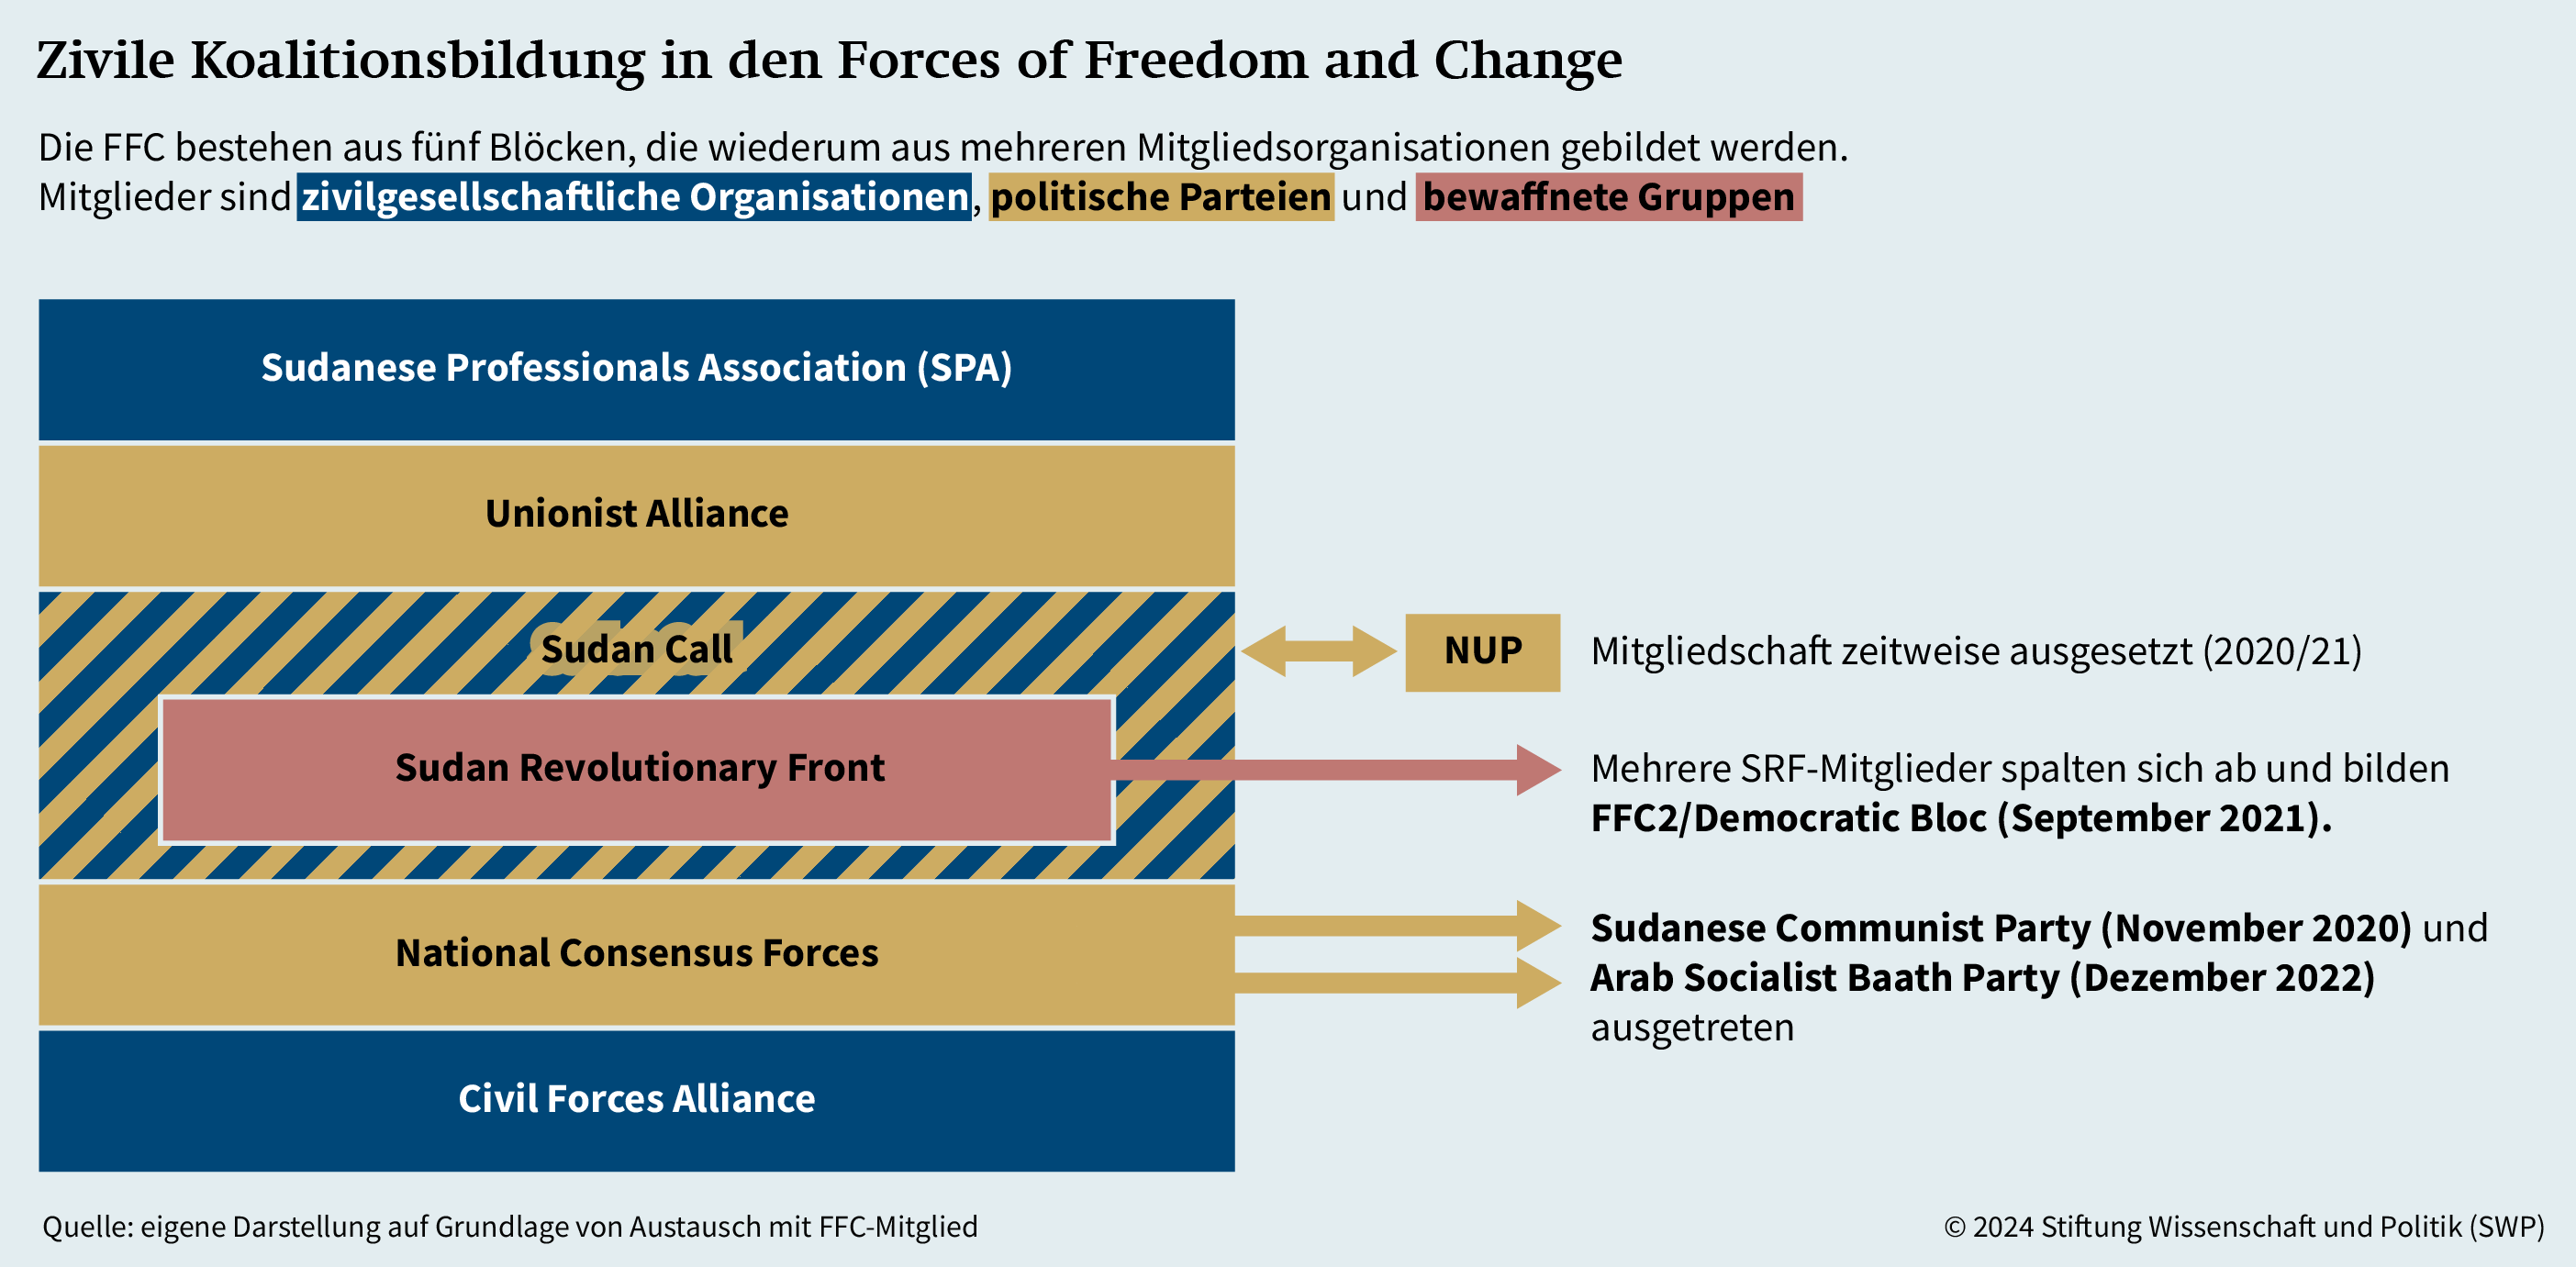 Zivile Koalitionsbildung in den Forces of Freedom and Change